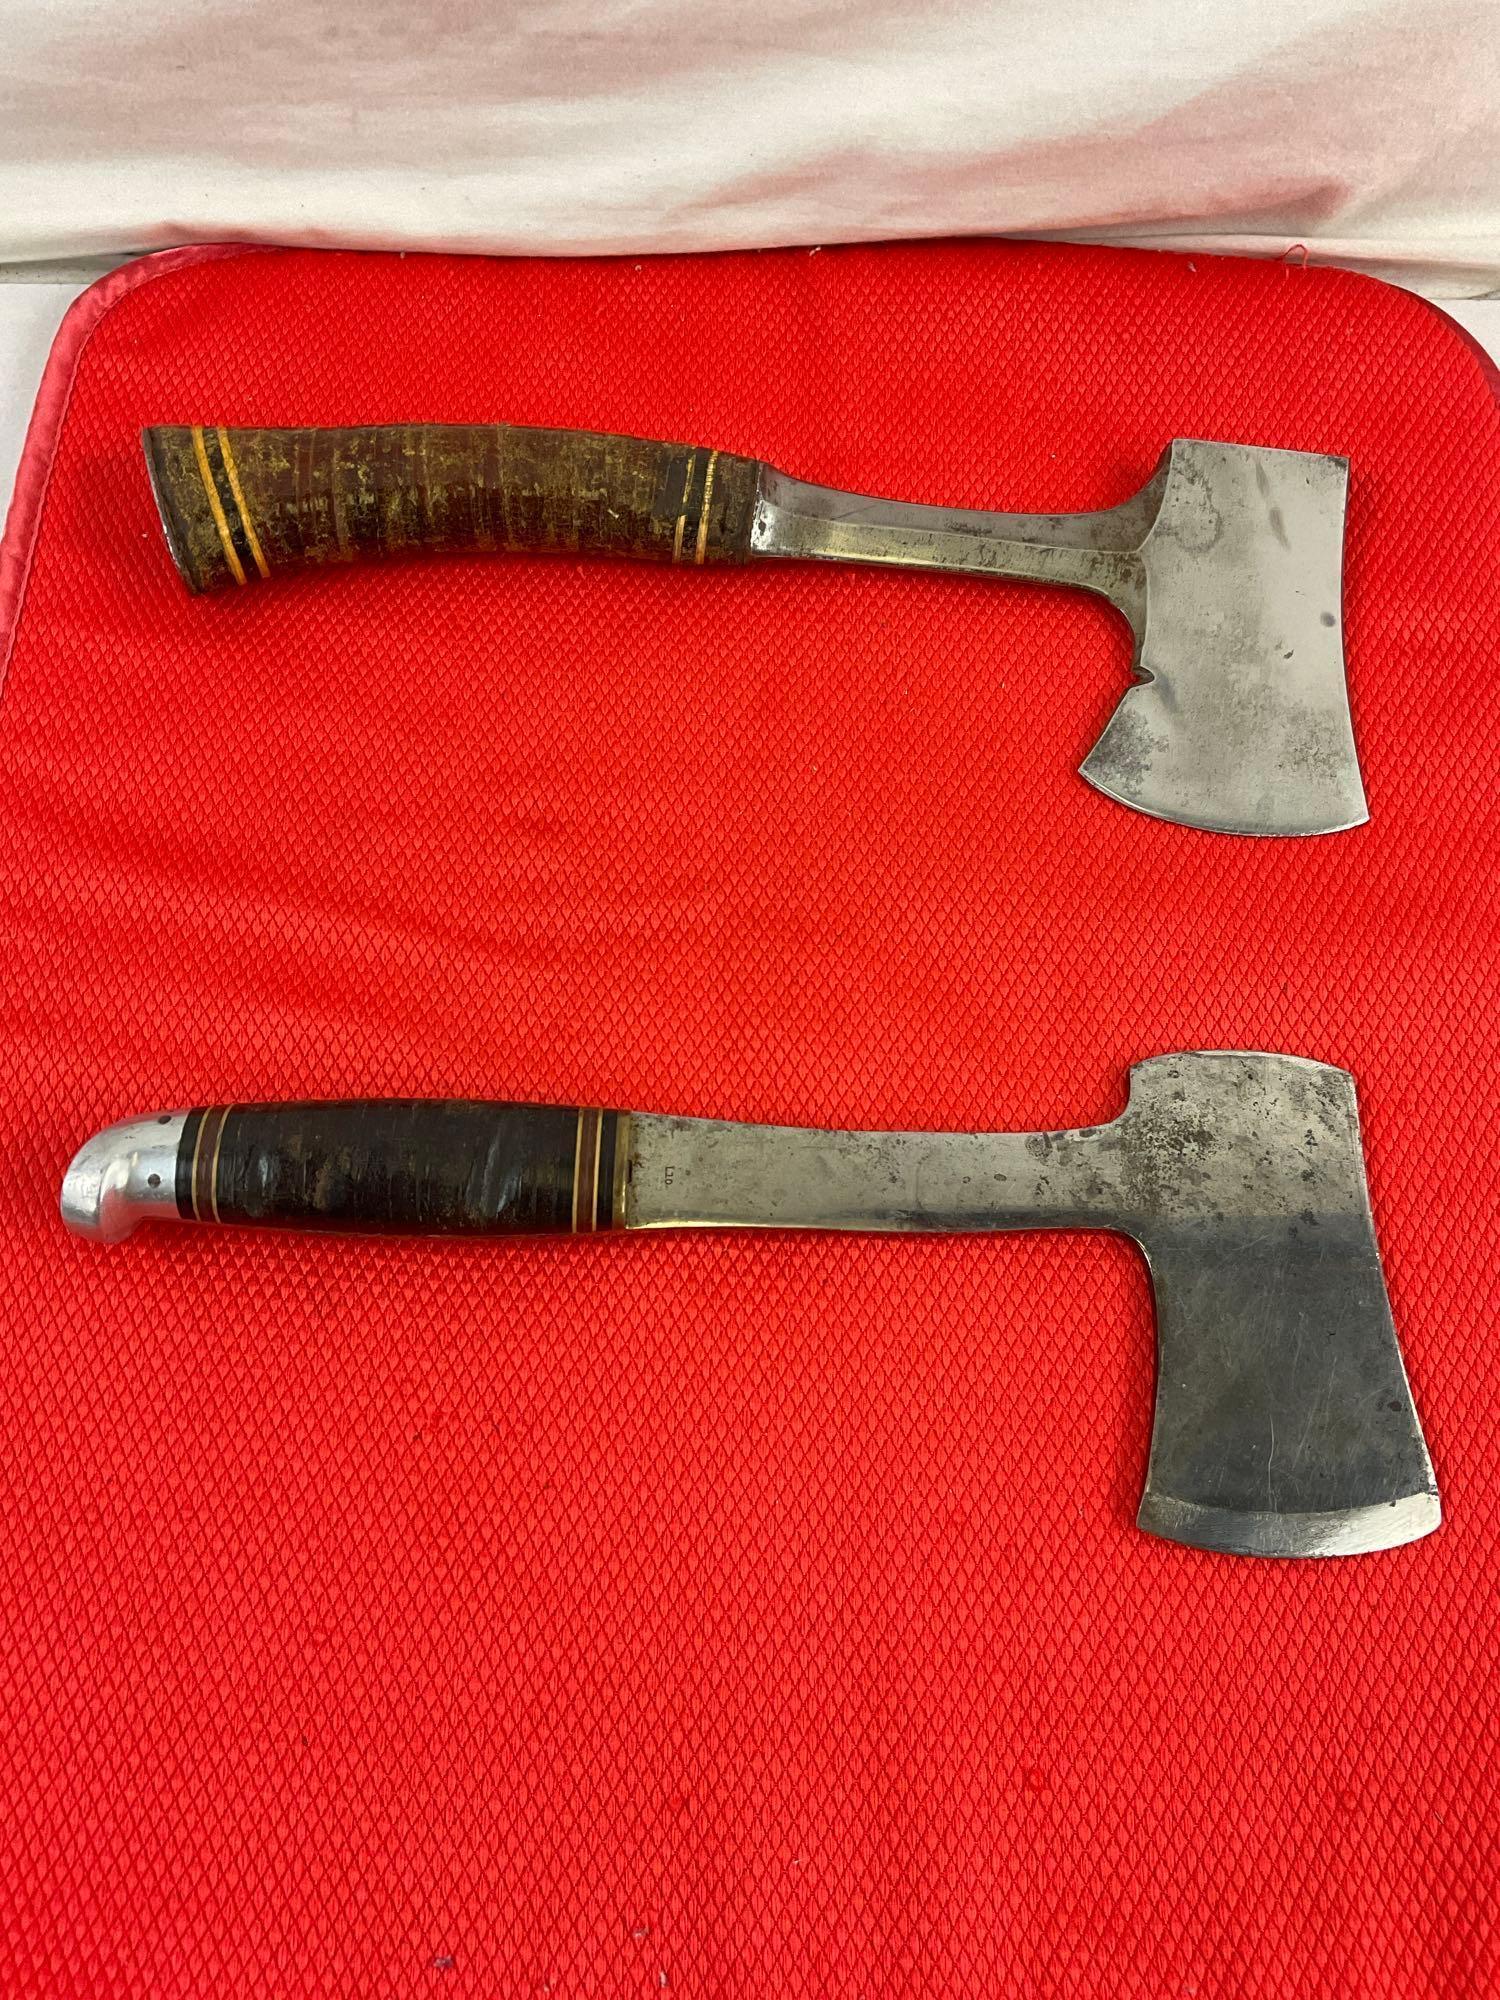 2 pcs Vintage Steel Camping Hatchets. Estwing 14A w/ Estwing Leather Sheath #2. Western L10. See